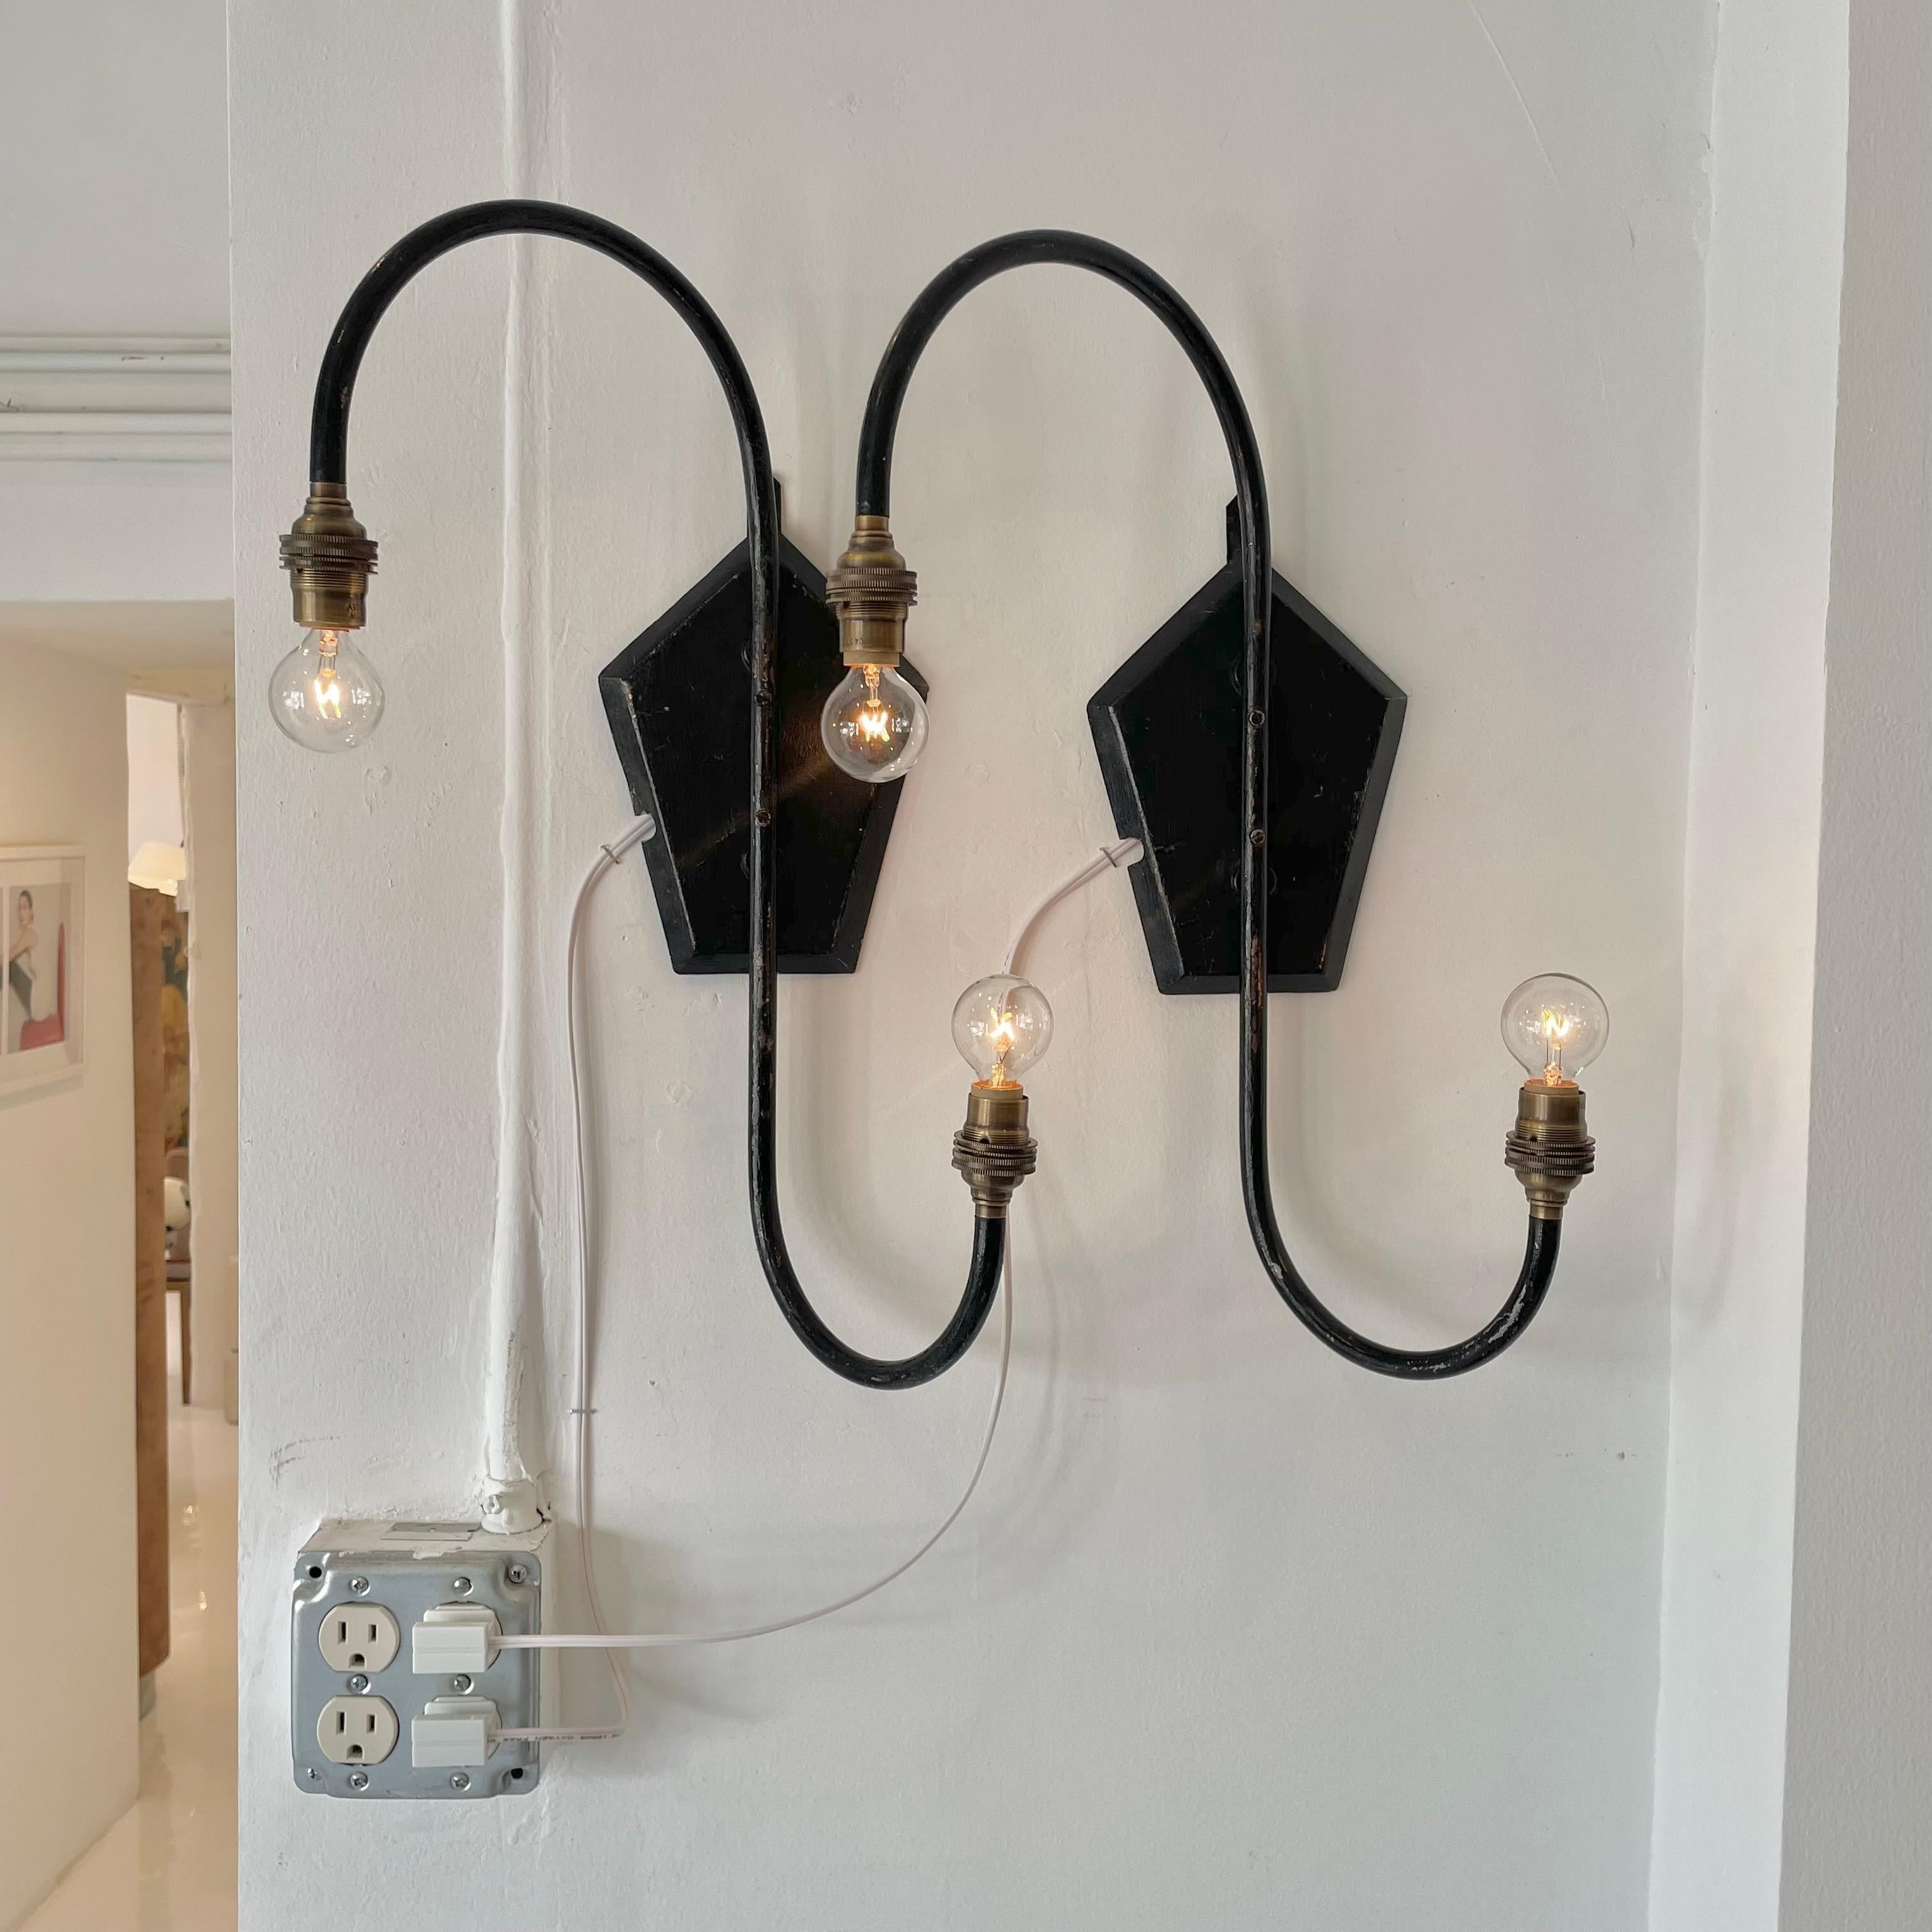 Unique pair of mid century French sconces in the shape of two offset fish hooks. Metal tube body with a metal backplate hand painted in a gothic black paint with amazing patina. Eye catching lines with the option of custom mini shades for an